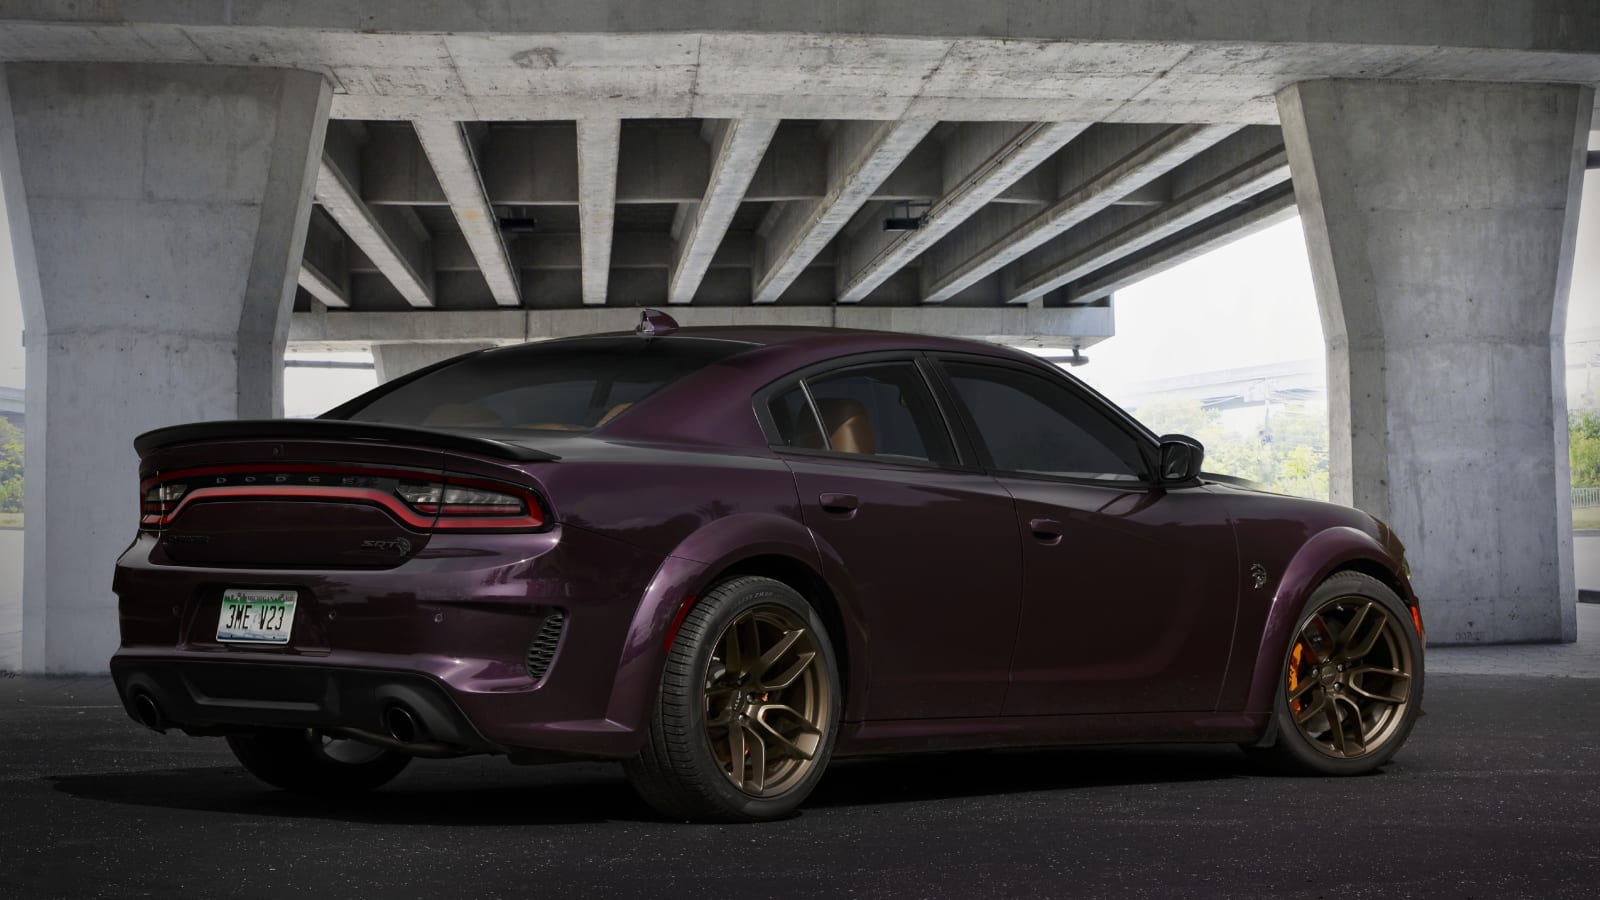 2022 Dodge Charger and Challenger Hellcat Redeye Jailbreak models add power, personalization options